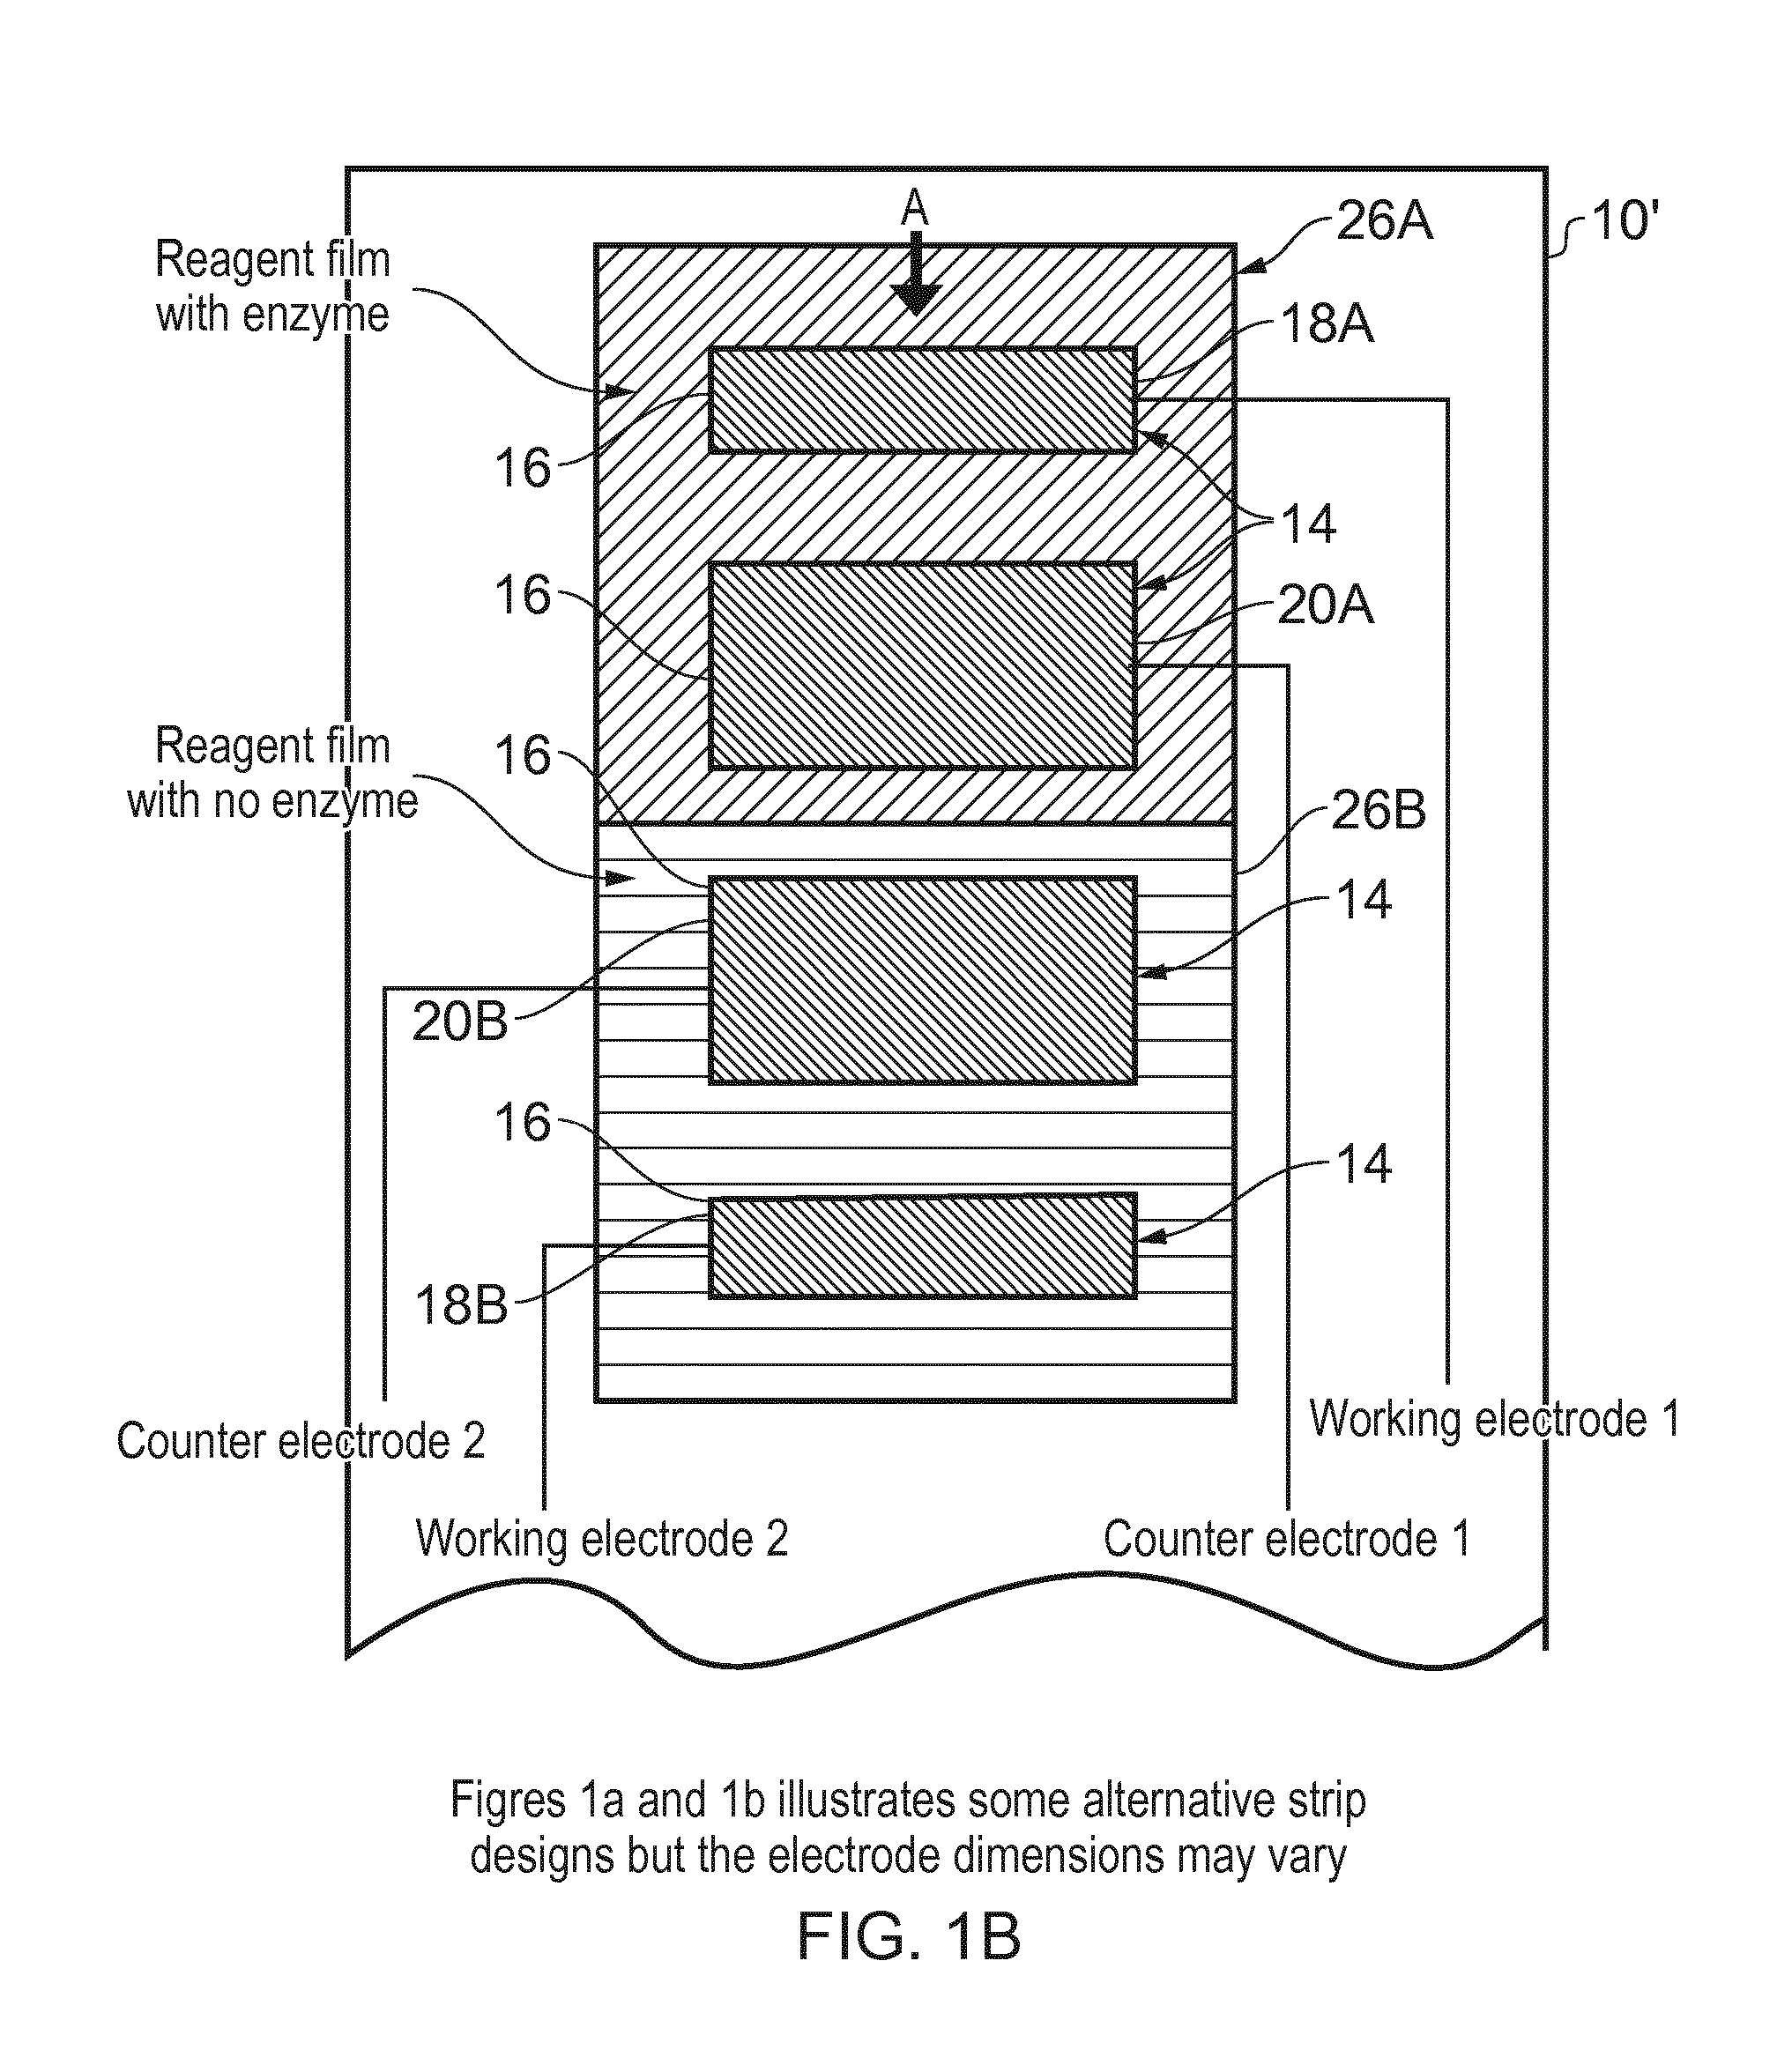 Methods and apparatus for determining analyte in a sample using a sensor having electrodes which are provided with an enzyme and a mediator